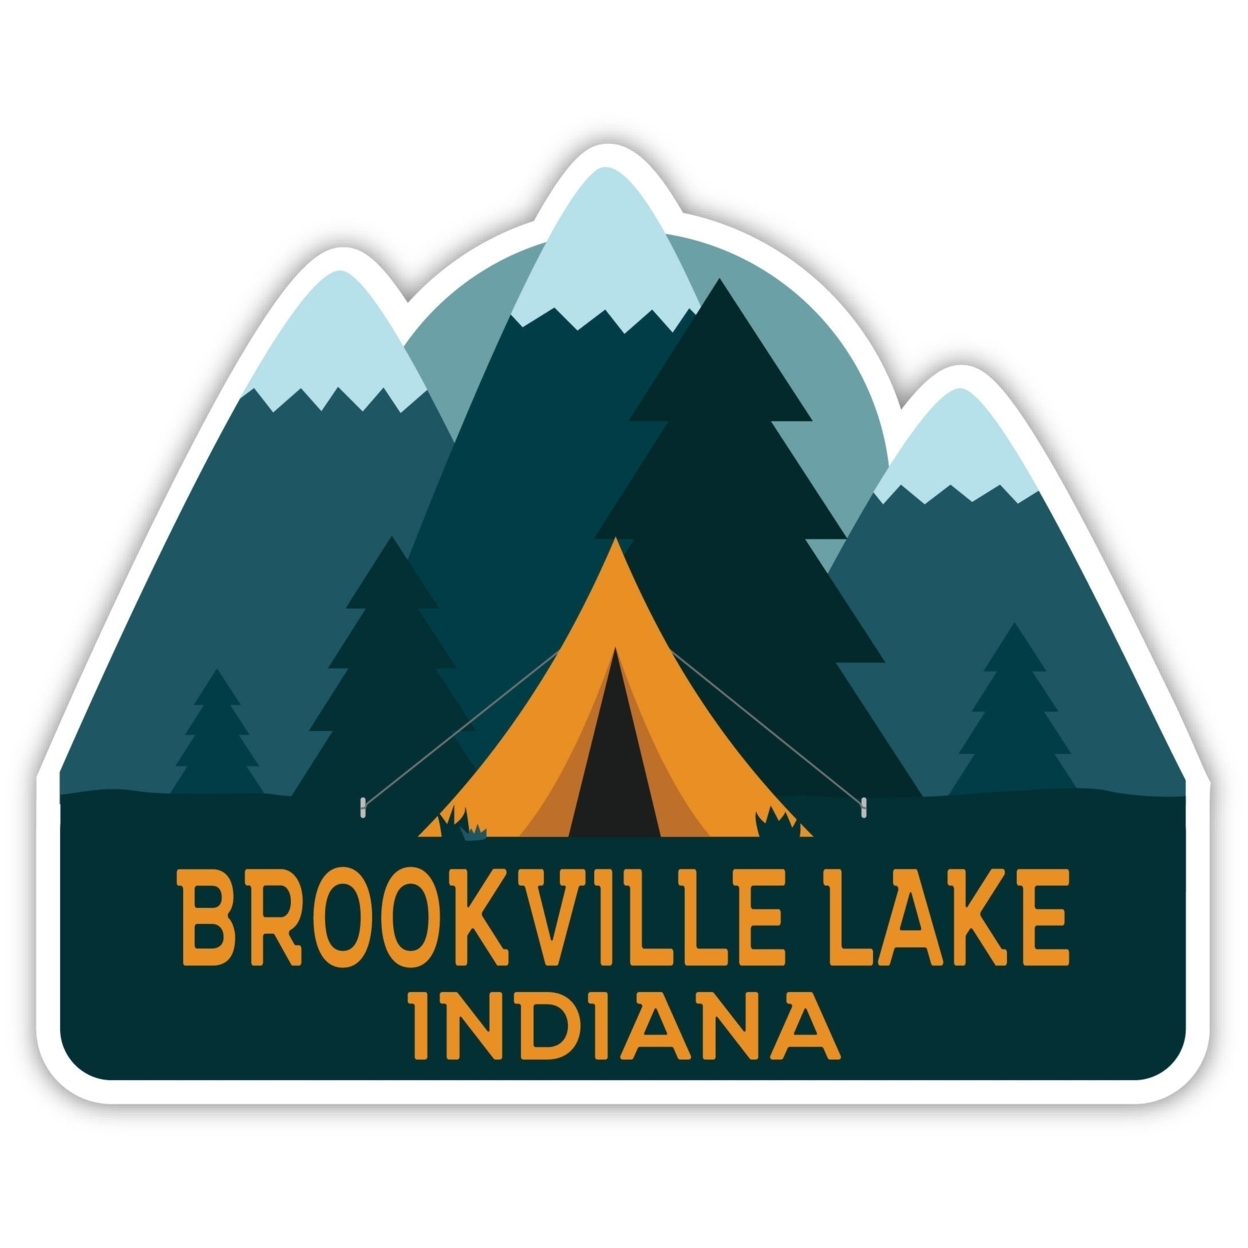 Brookville Lake Indiana Souvenir Decorative Stickers (Choose Theme And Size) - 4-Pack, 6-Inch, Tent